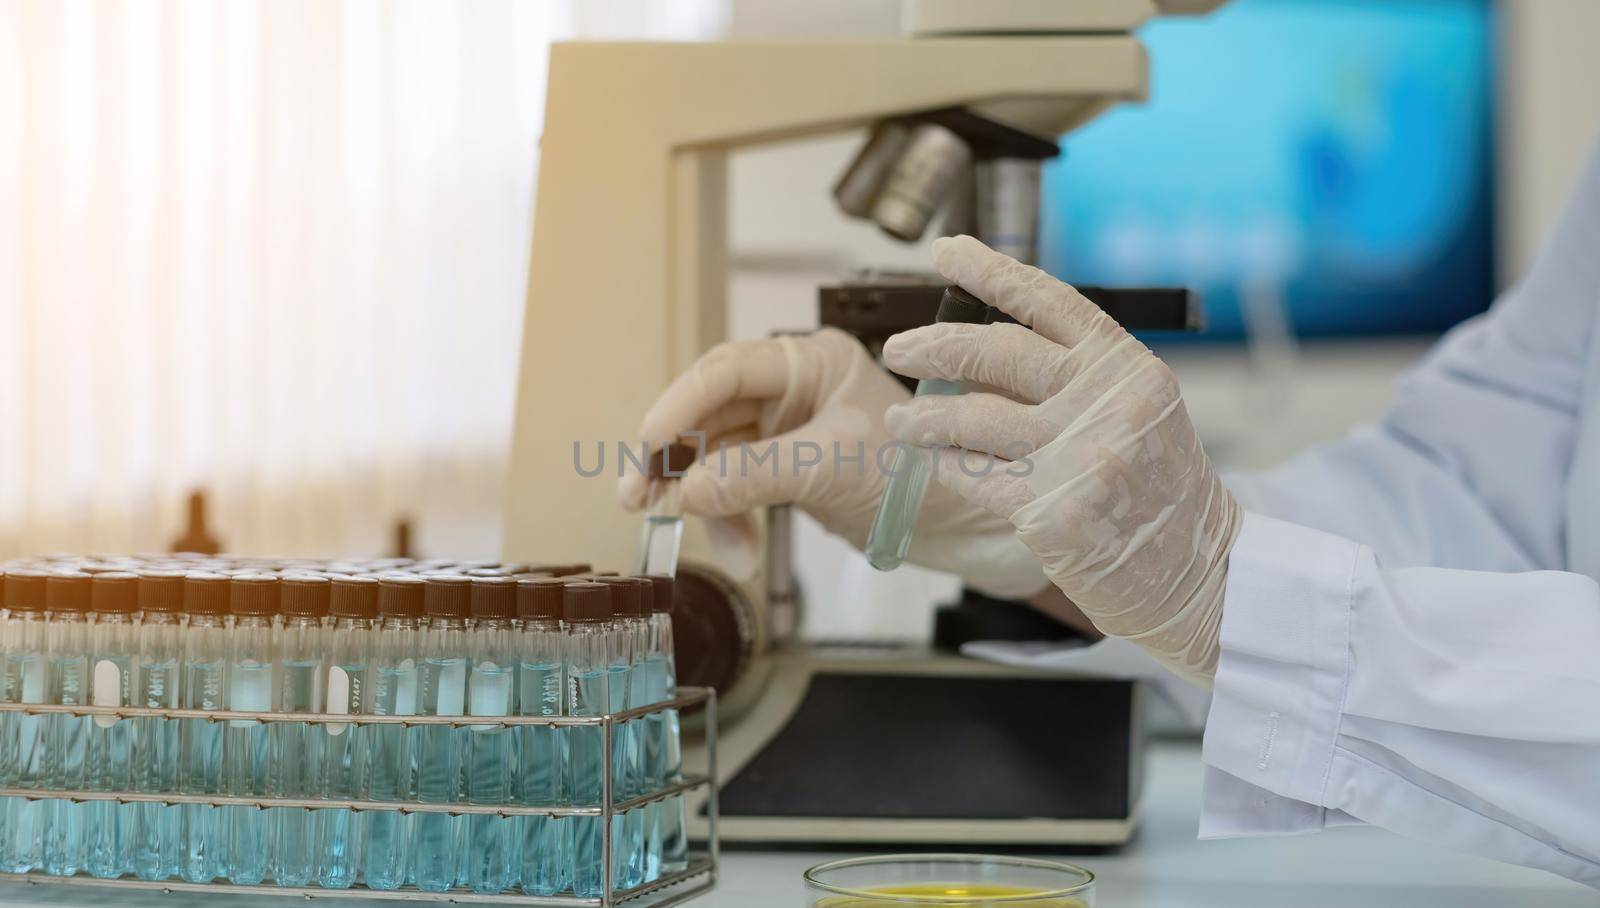 Biochemistry laboratory research, Chemist is analyzing sample in laboratory with Microscope equipment and science experiments glassware containing chemical liquid..